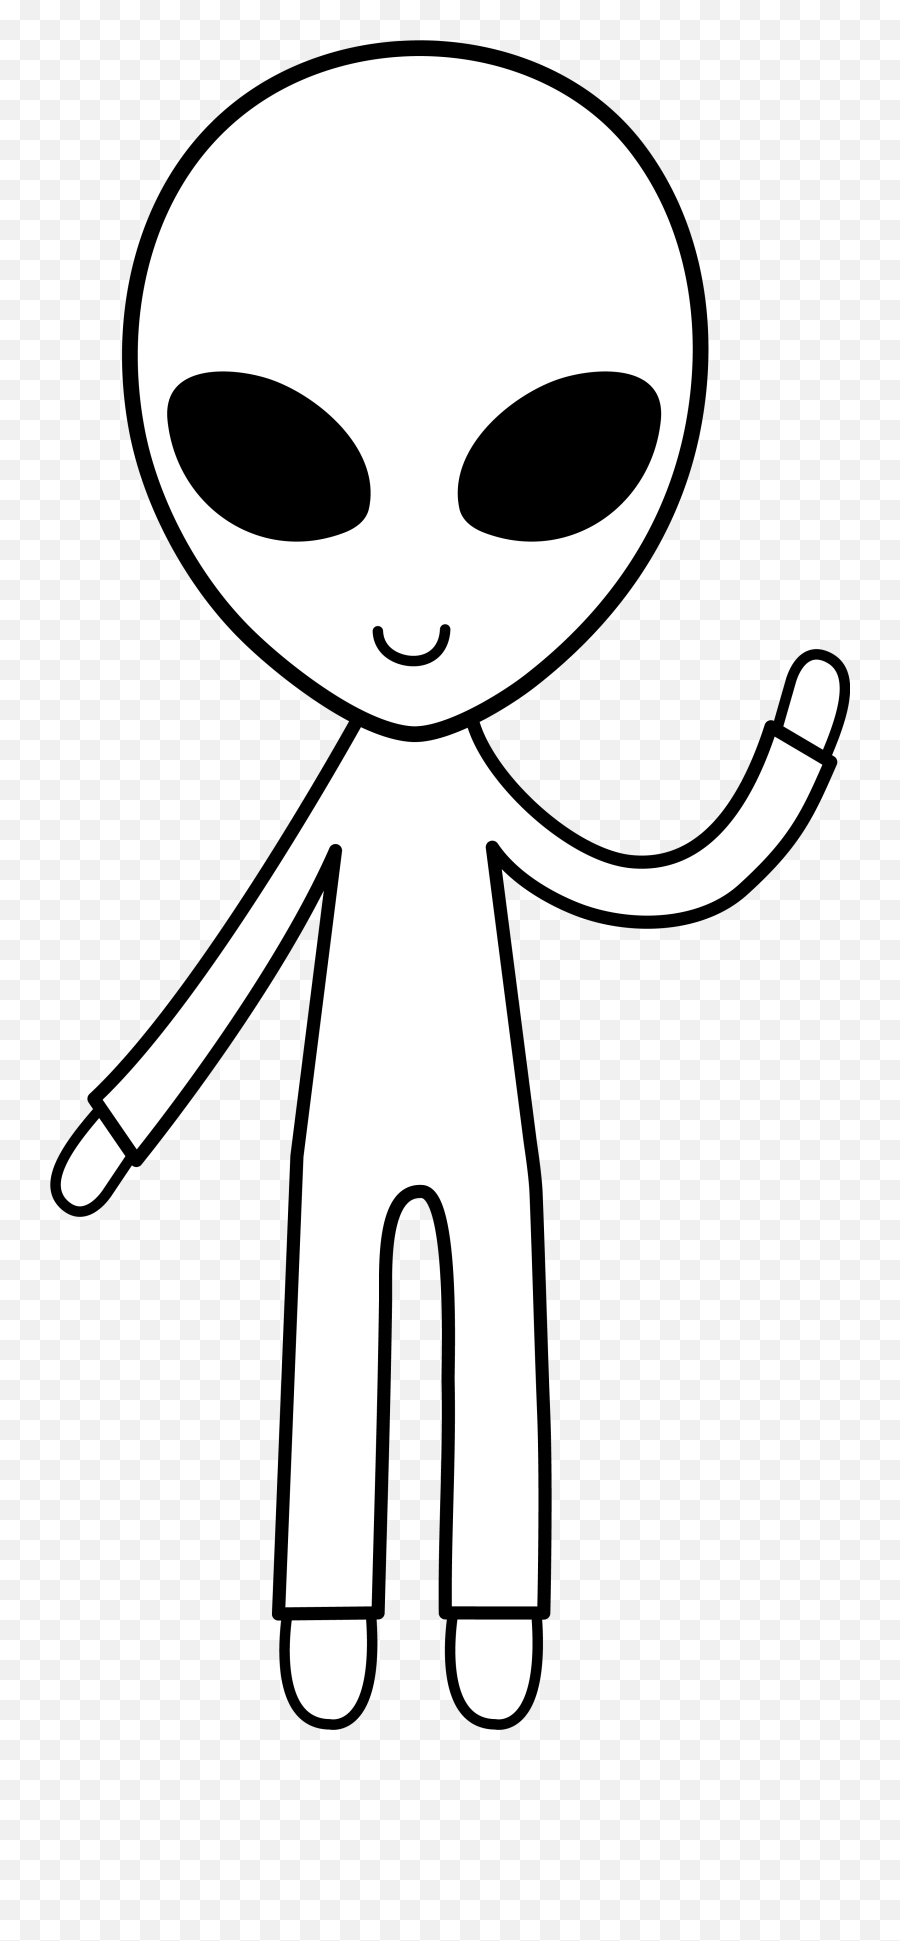 Cute Alien Drawing Images Pictures - Becuo Clip Art Library Outline Alien Clipart Black And White Emoji,Ufo Emoticons